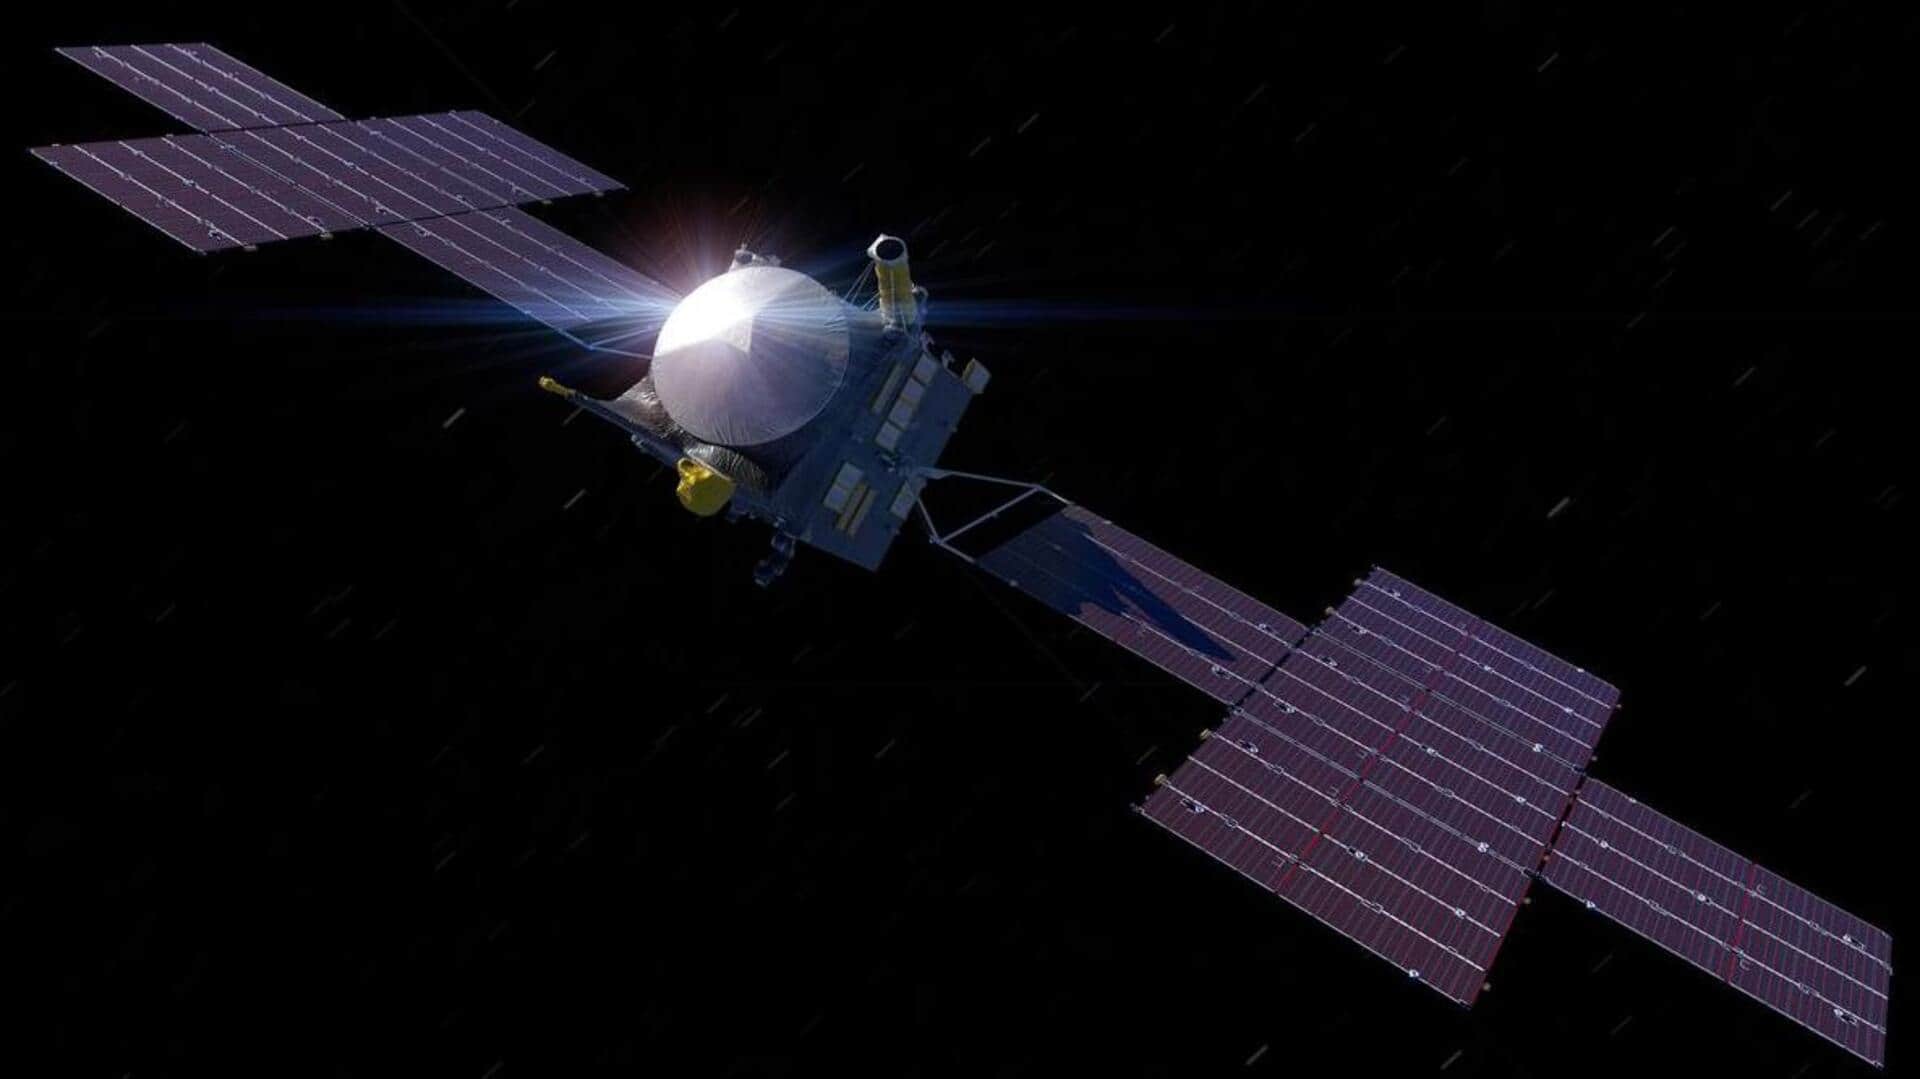 NASA's laser communication experiment launches tomorrow: Know its significance